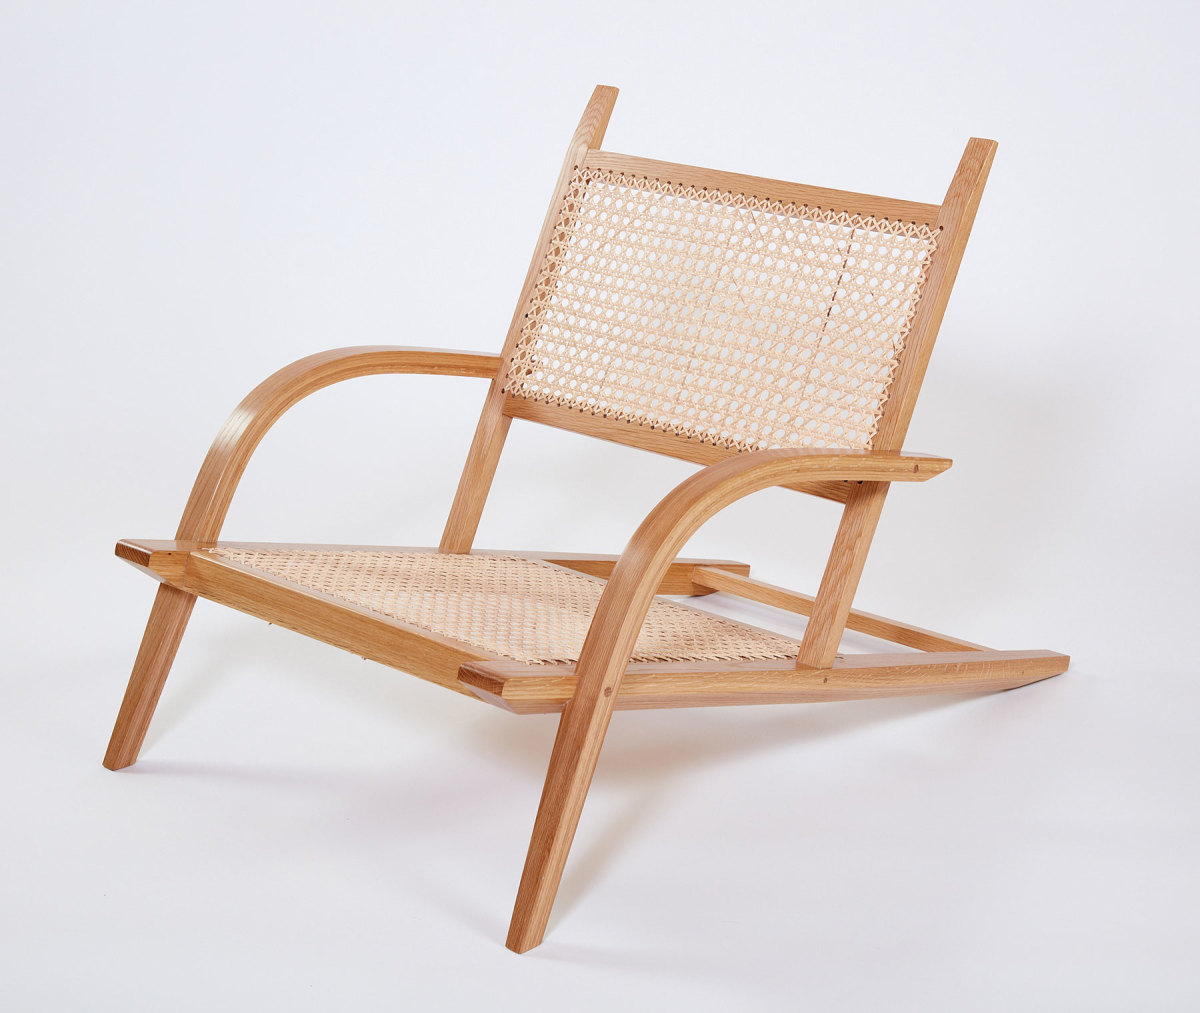 “Low Caned Lounge” by Grace Elwood at the WantedDesign Fair